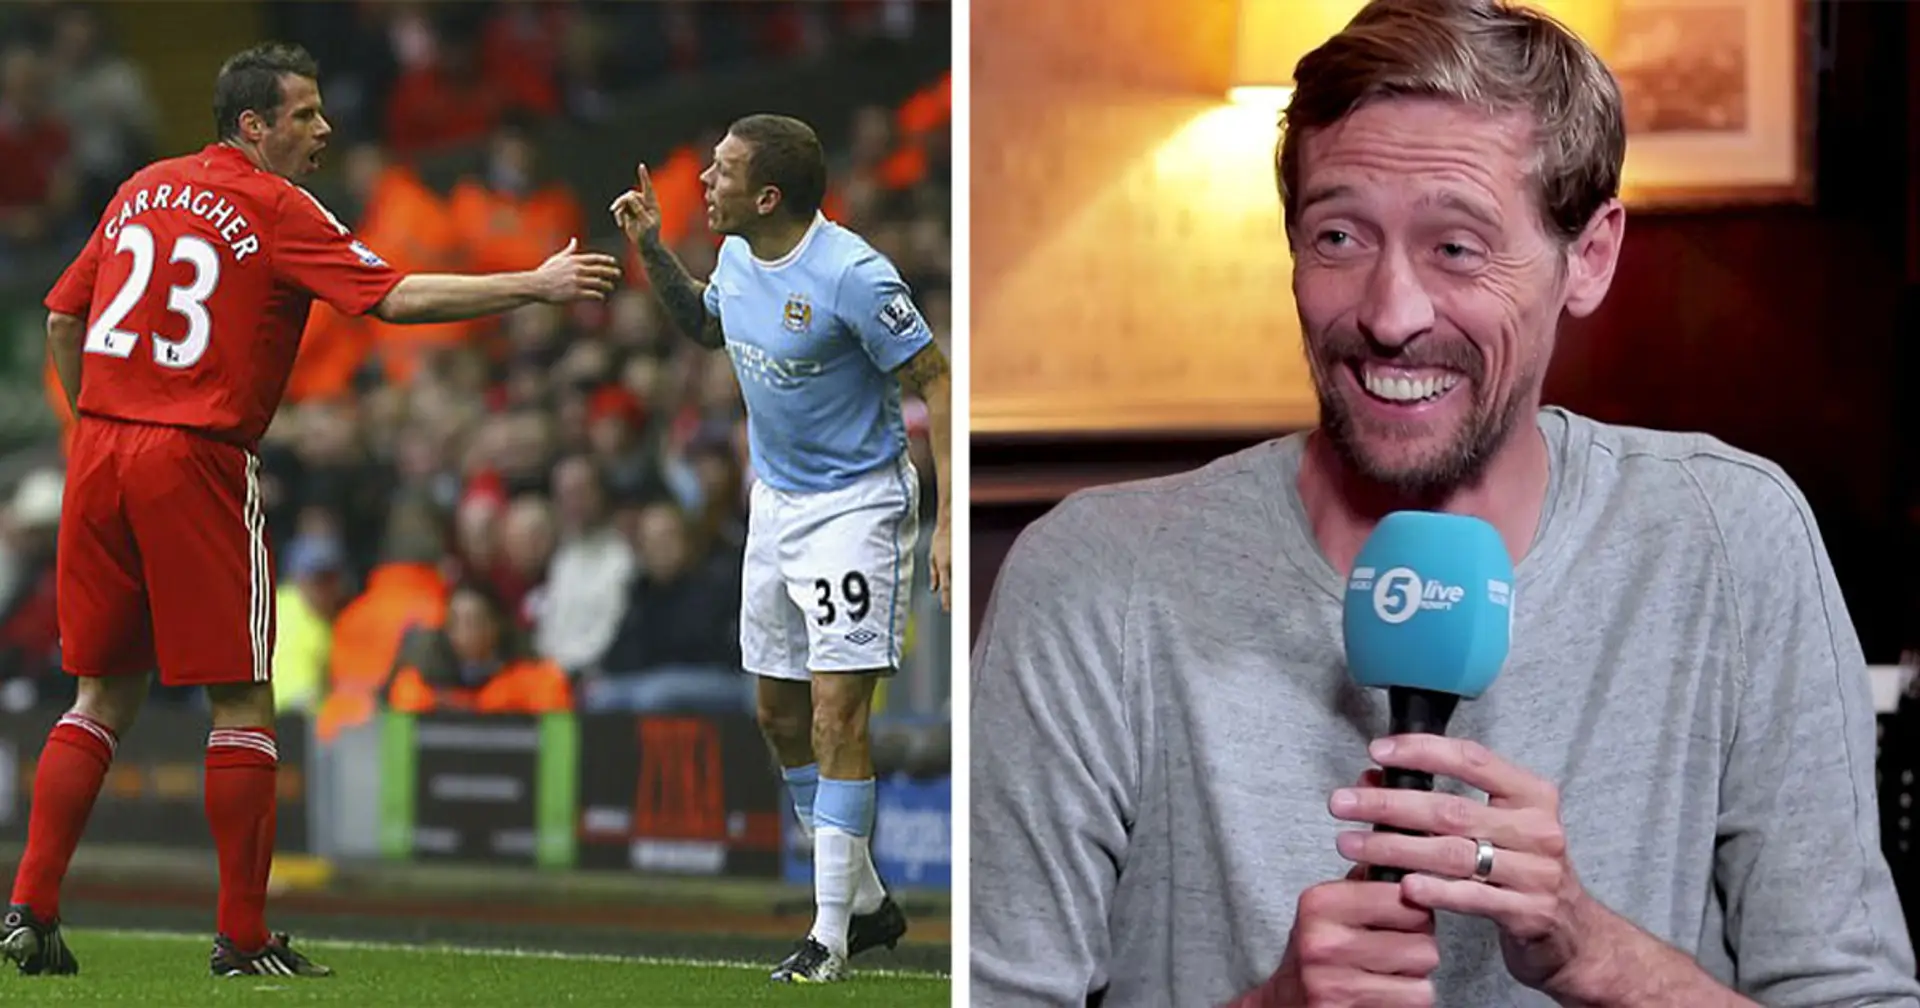 'Carra was gobsmacked': Peter Crouch reveals Craig Bellamy's insane rant at Jamie Carragher in Liverpool vs Newcastle